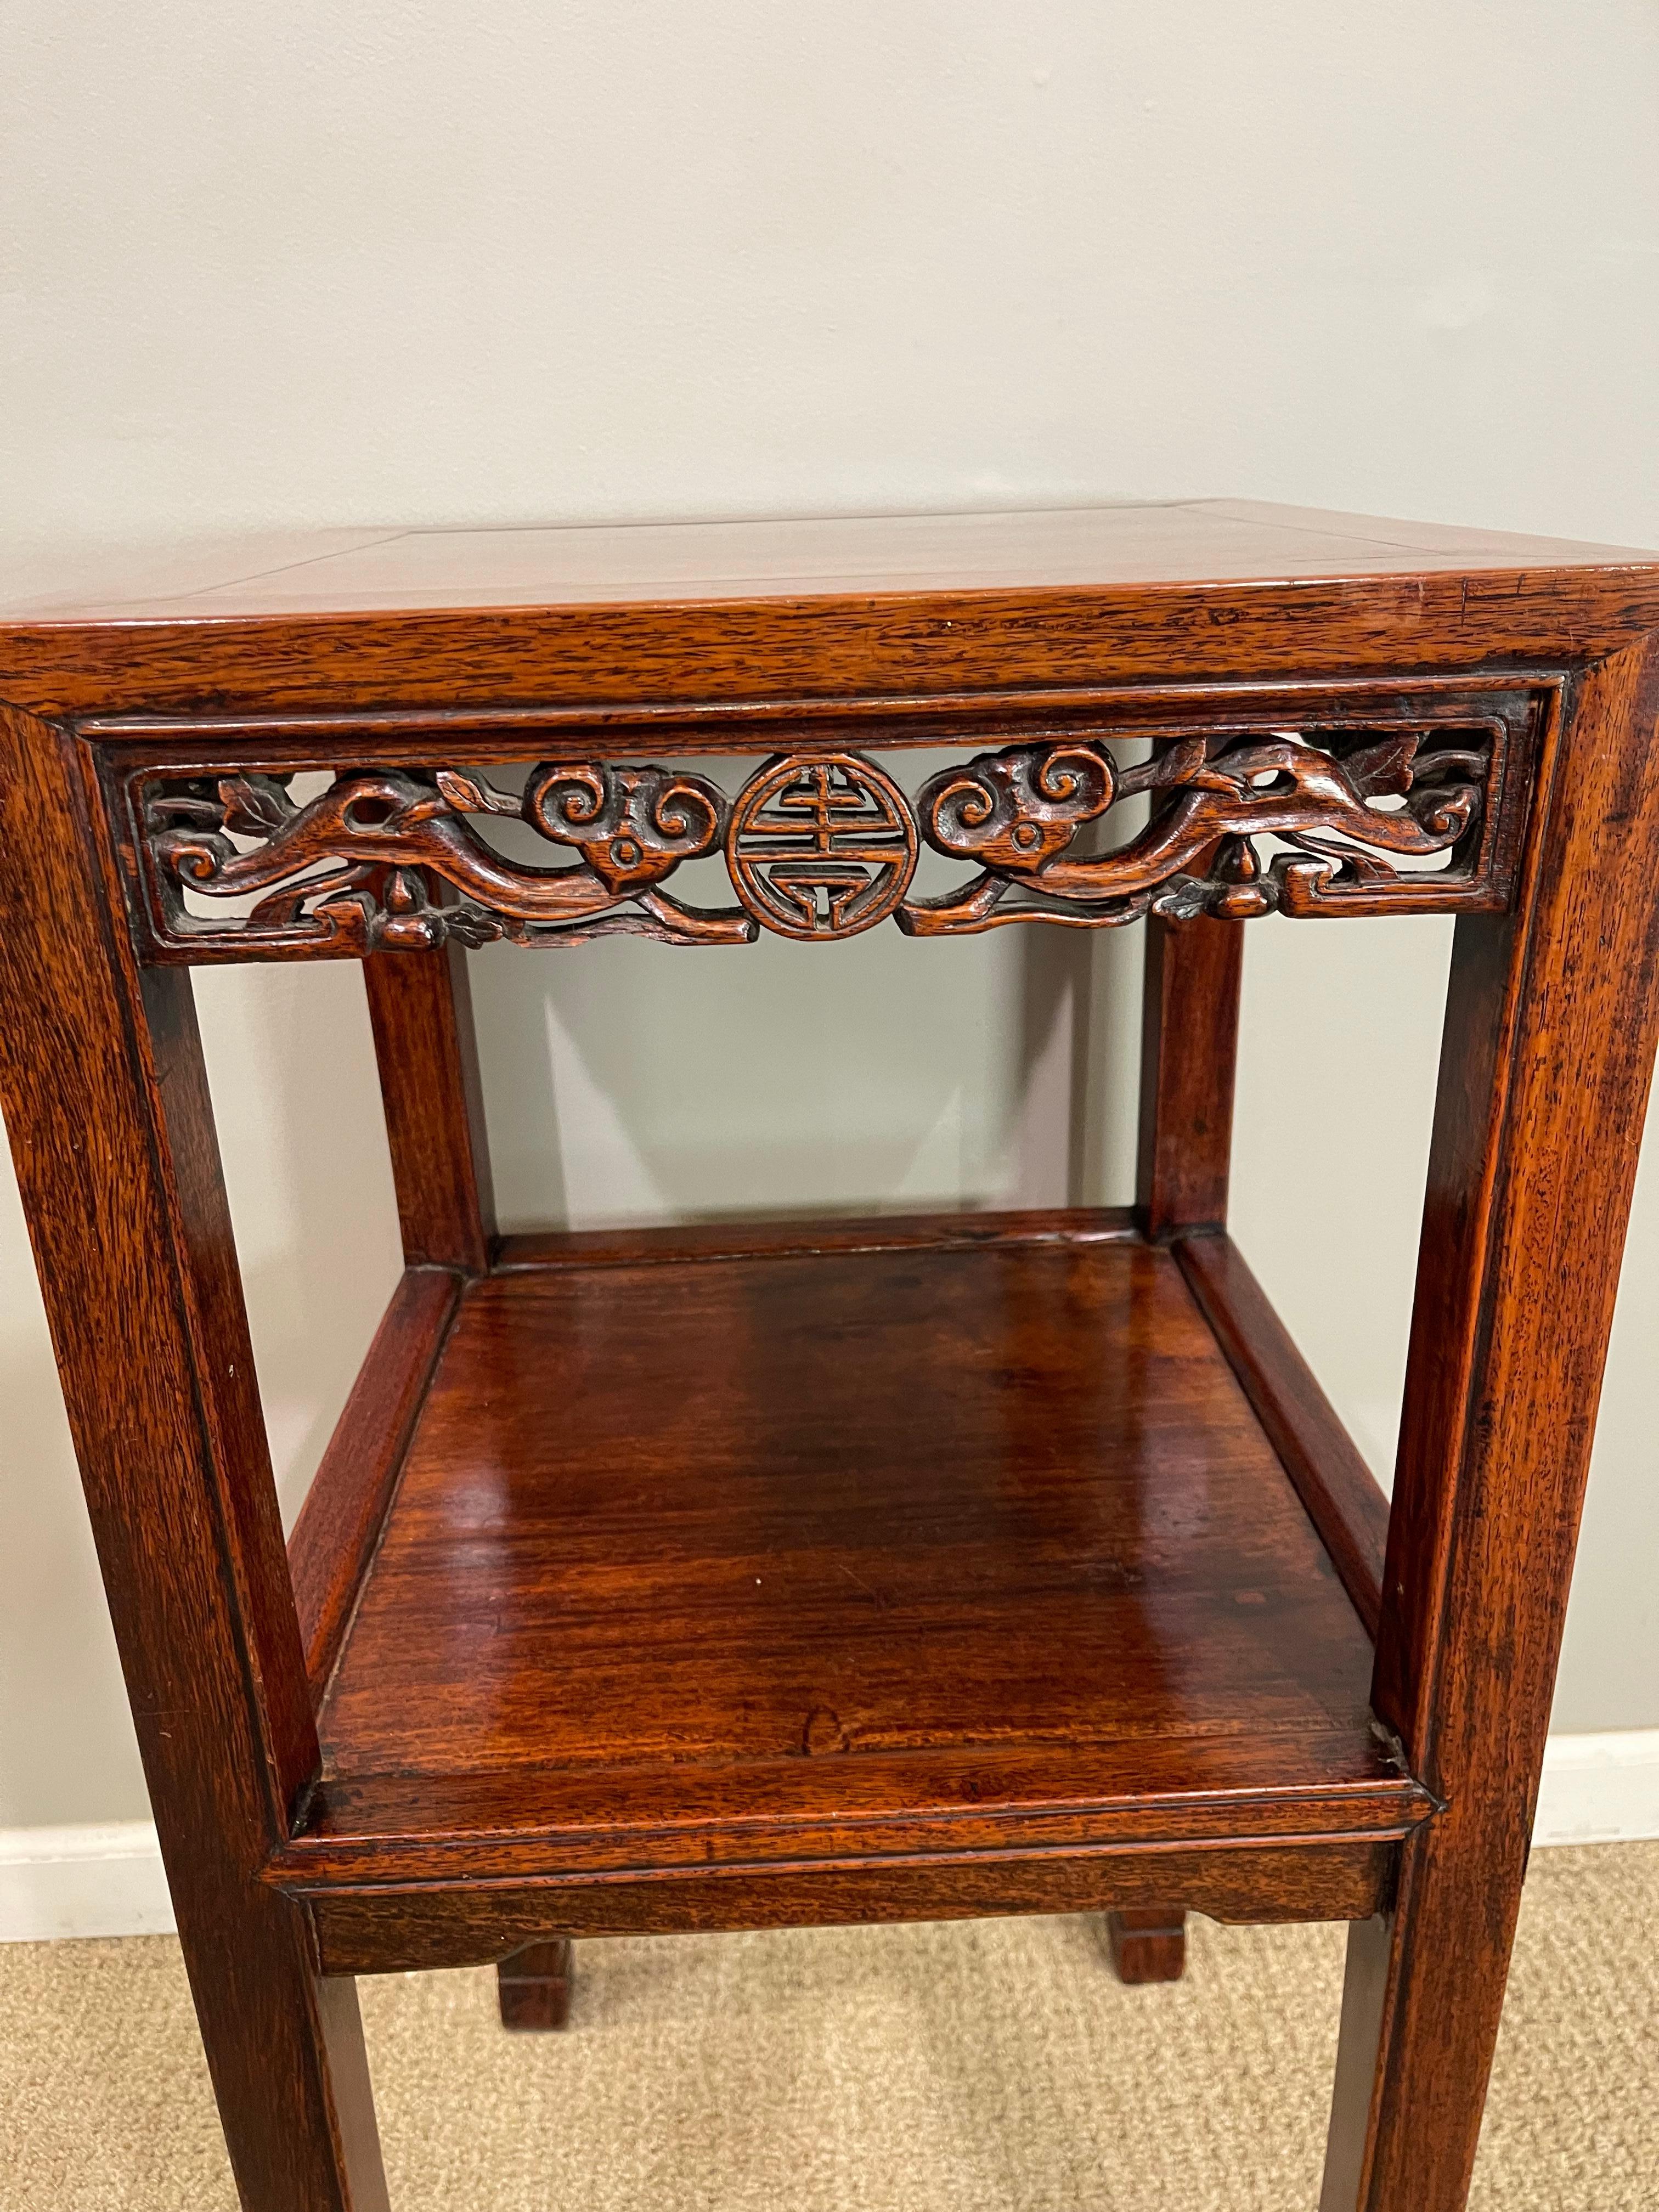 Wood Chinese Hardwood 'Hungmu' Tea Table, Late 19th Century / Early 20th Century For Sale